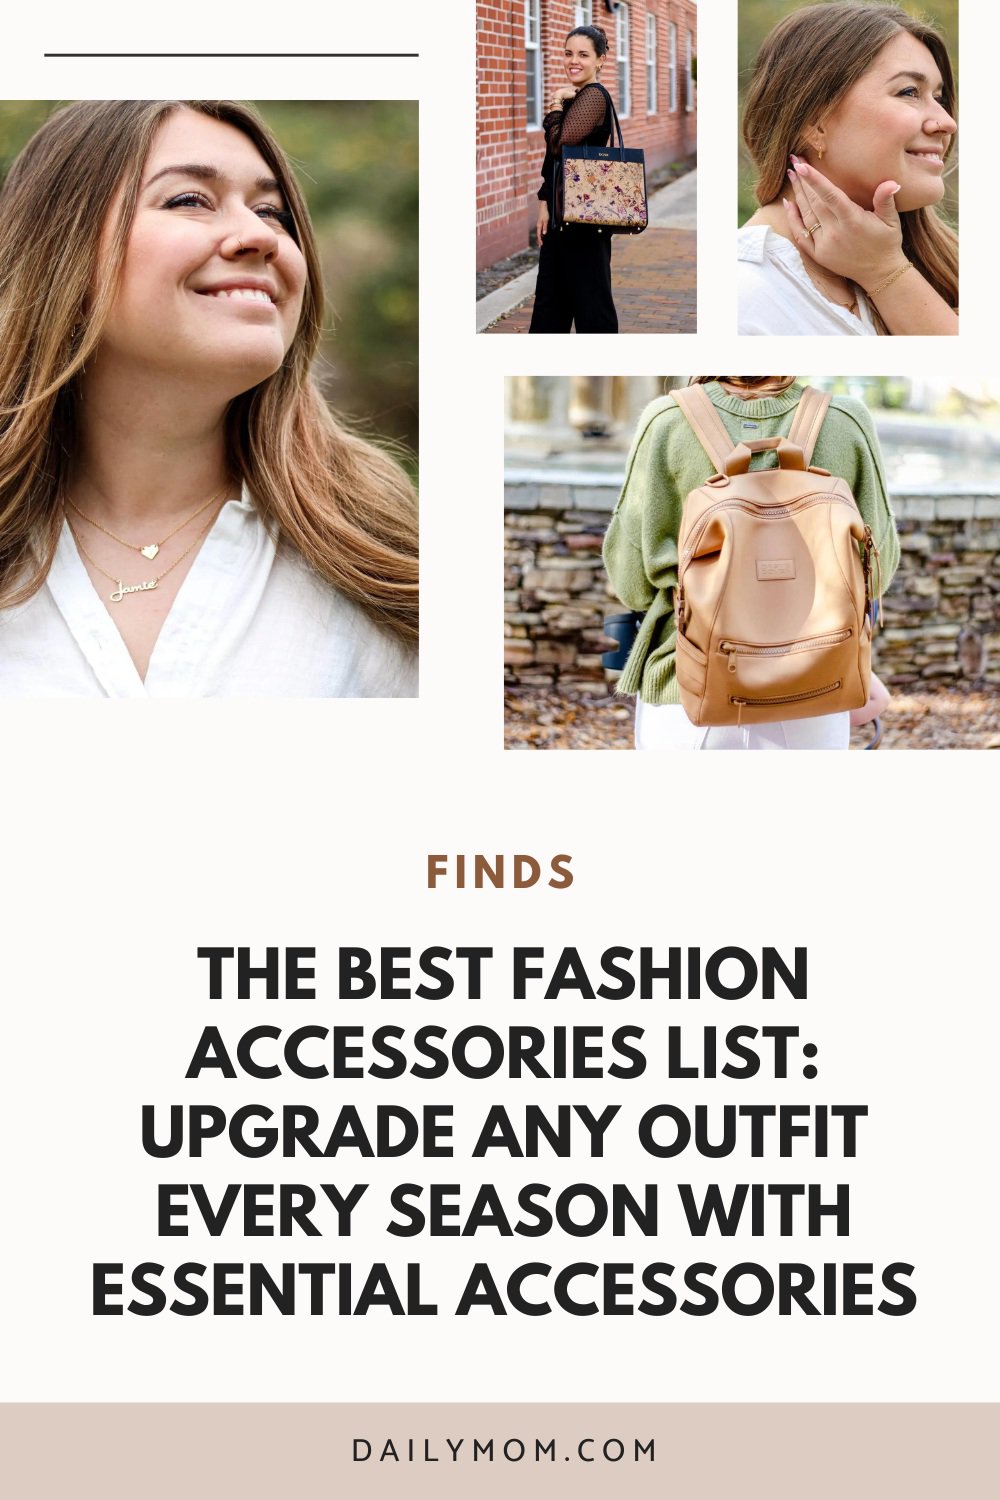 The Best Fashion Accessories List: Upgrade Any Outfit Every Season With Essential Accessories 59 Daily Mom, Magazine For Families